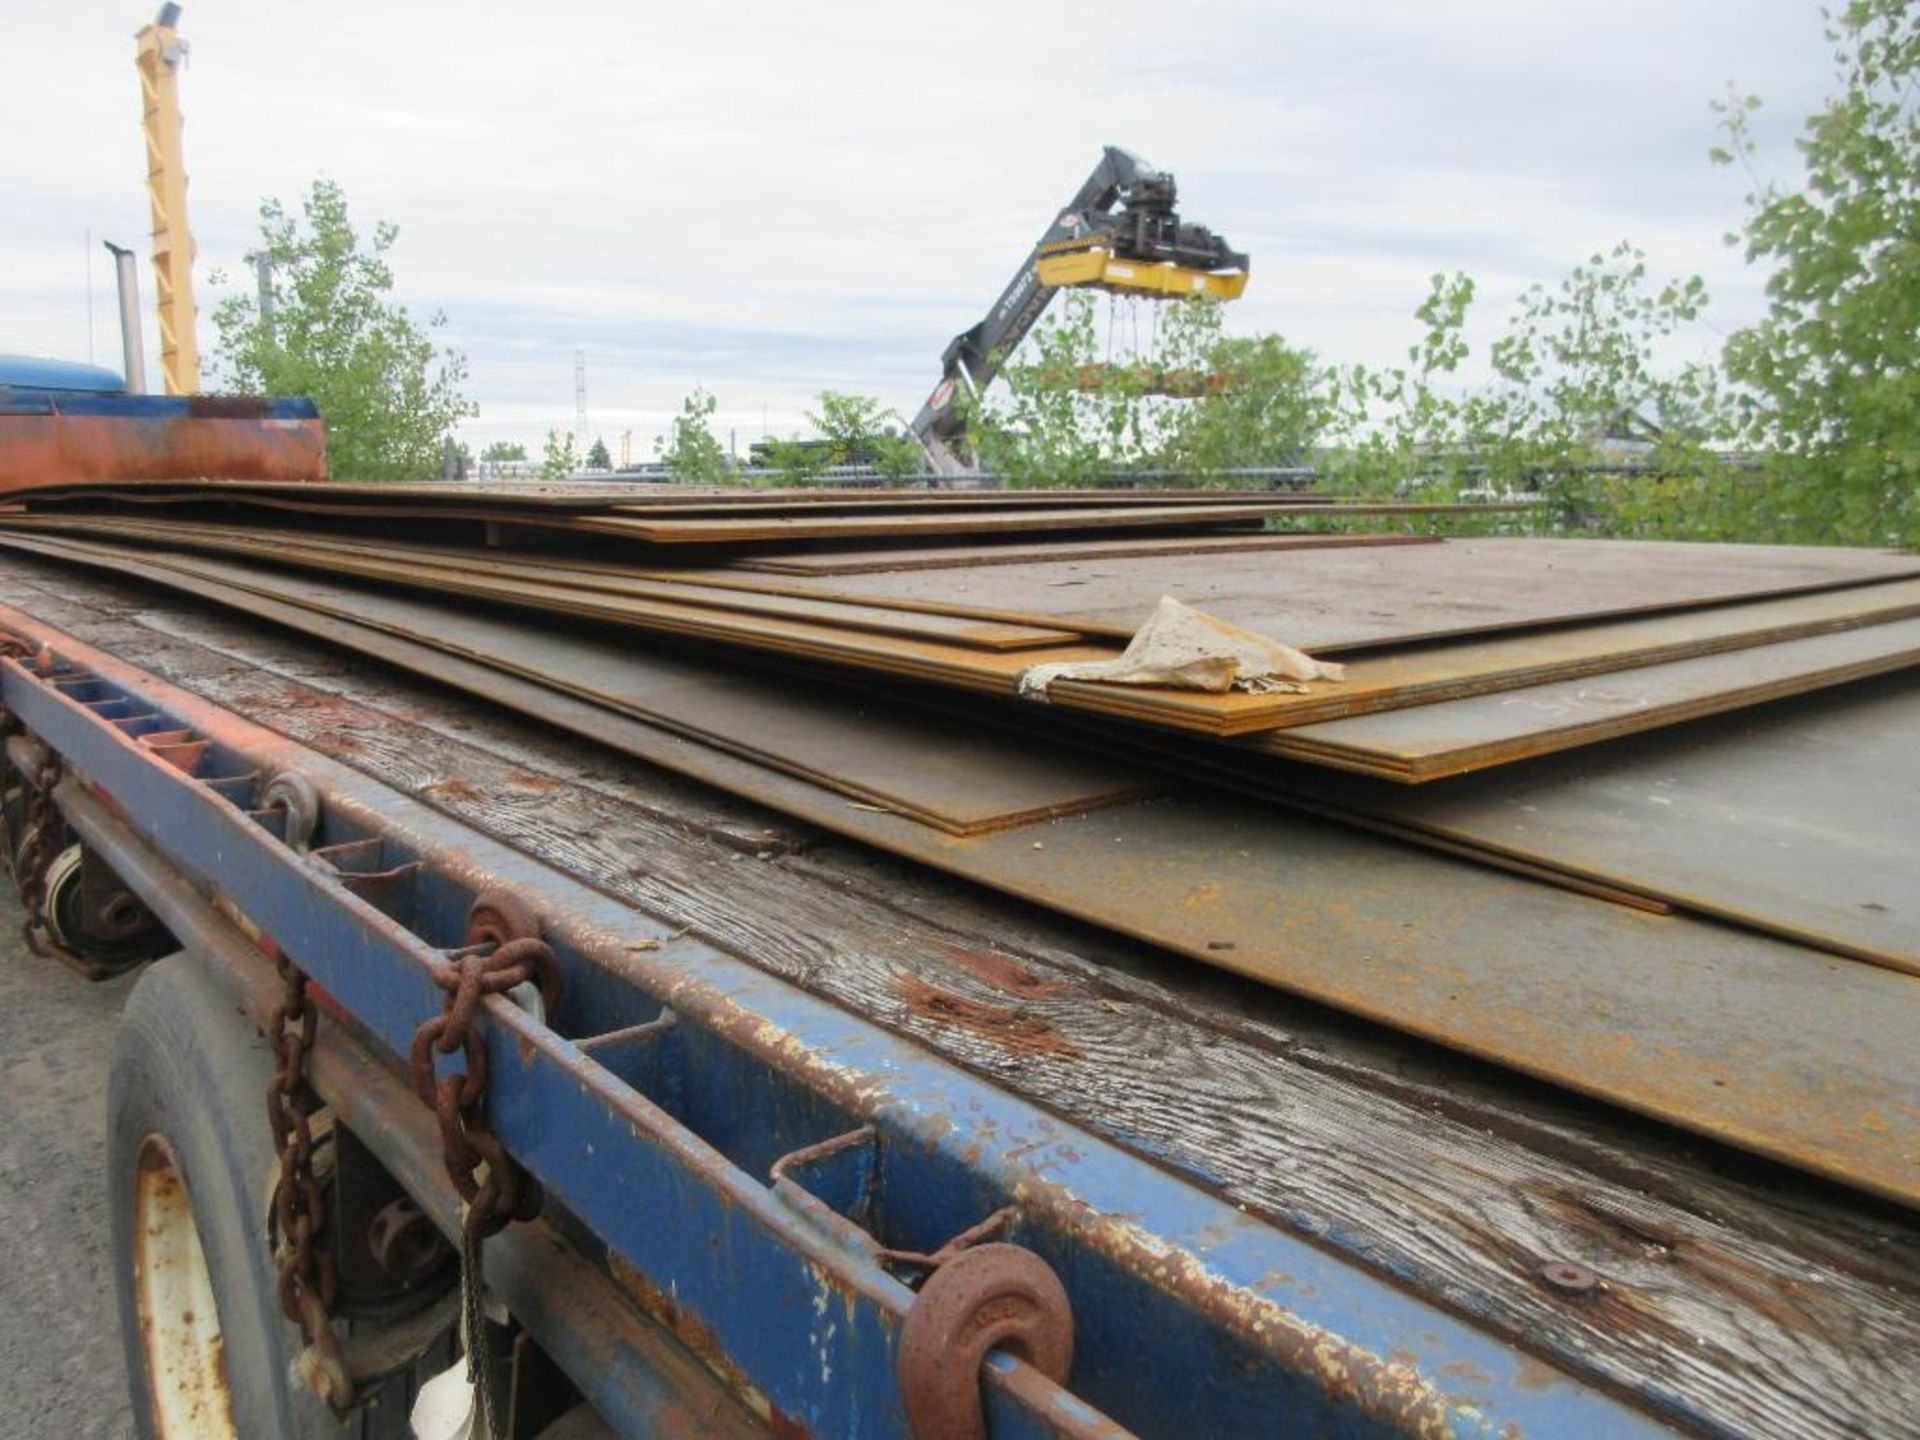 LOT OF 27 SHEETS OF PLATE STEEL ON TRAILER (NO TRAILER), TOTAL WEIGHT 293,559 LBS, SIZES PER PHOTO ( - Image 6 of 14